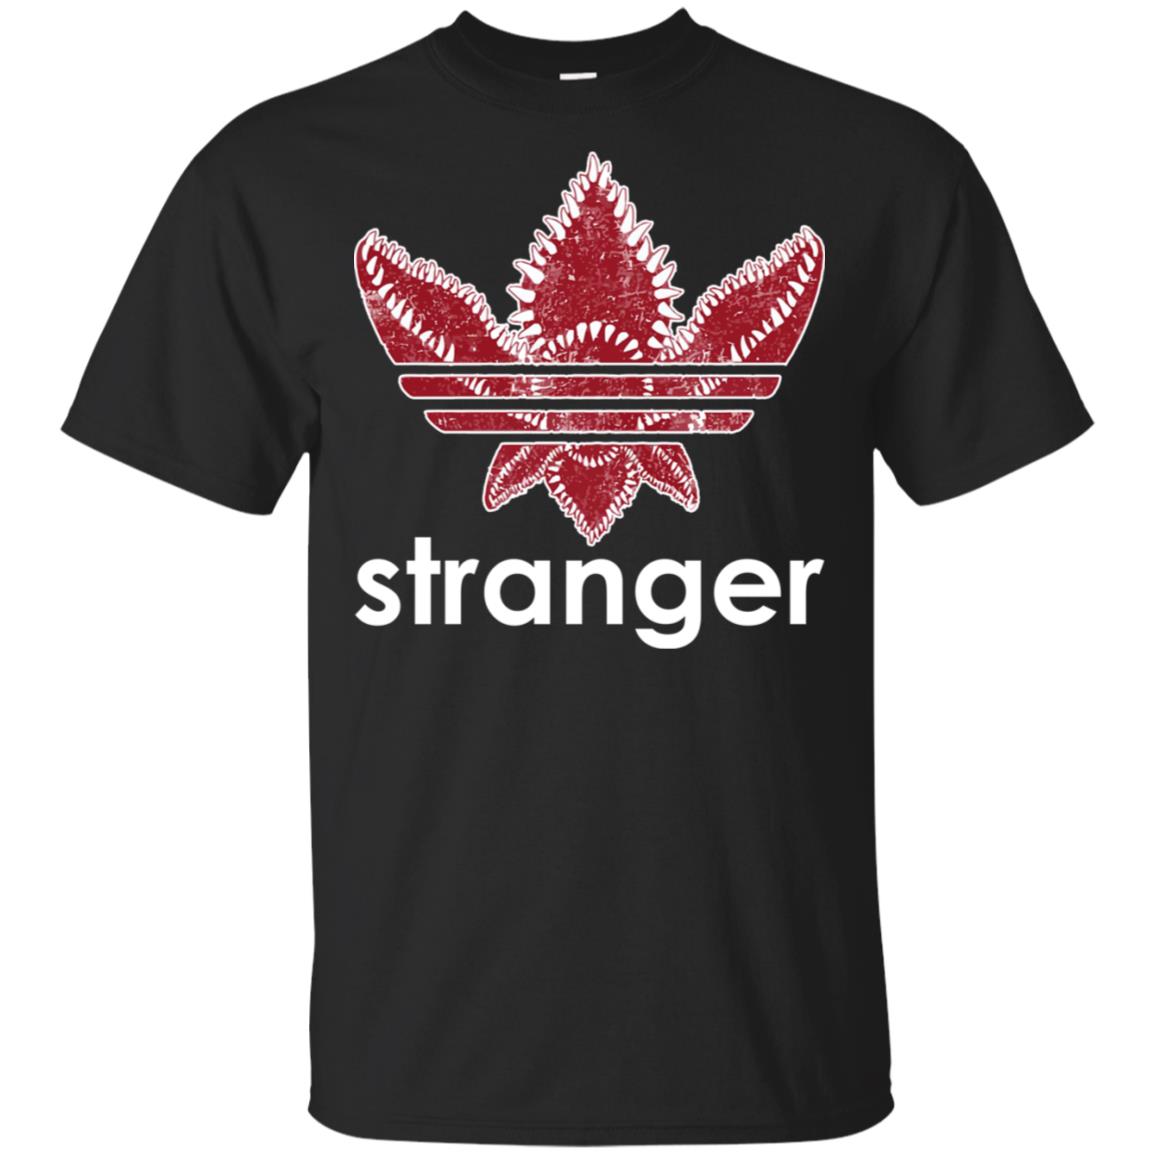 Stranger Things Shirt - TeeMoonley – Cool T-Shirts Store For Every Occasion